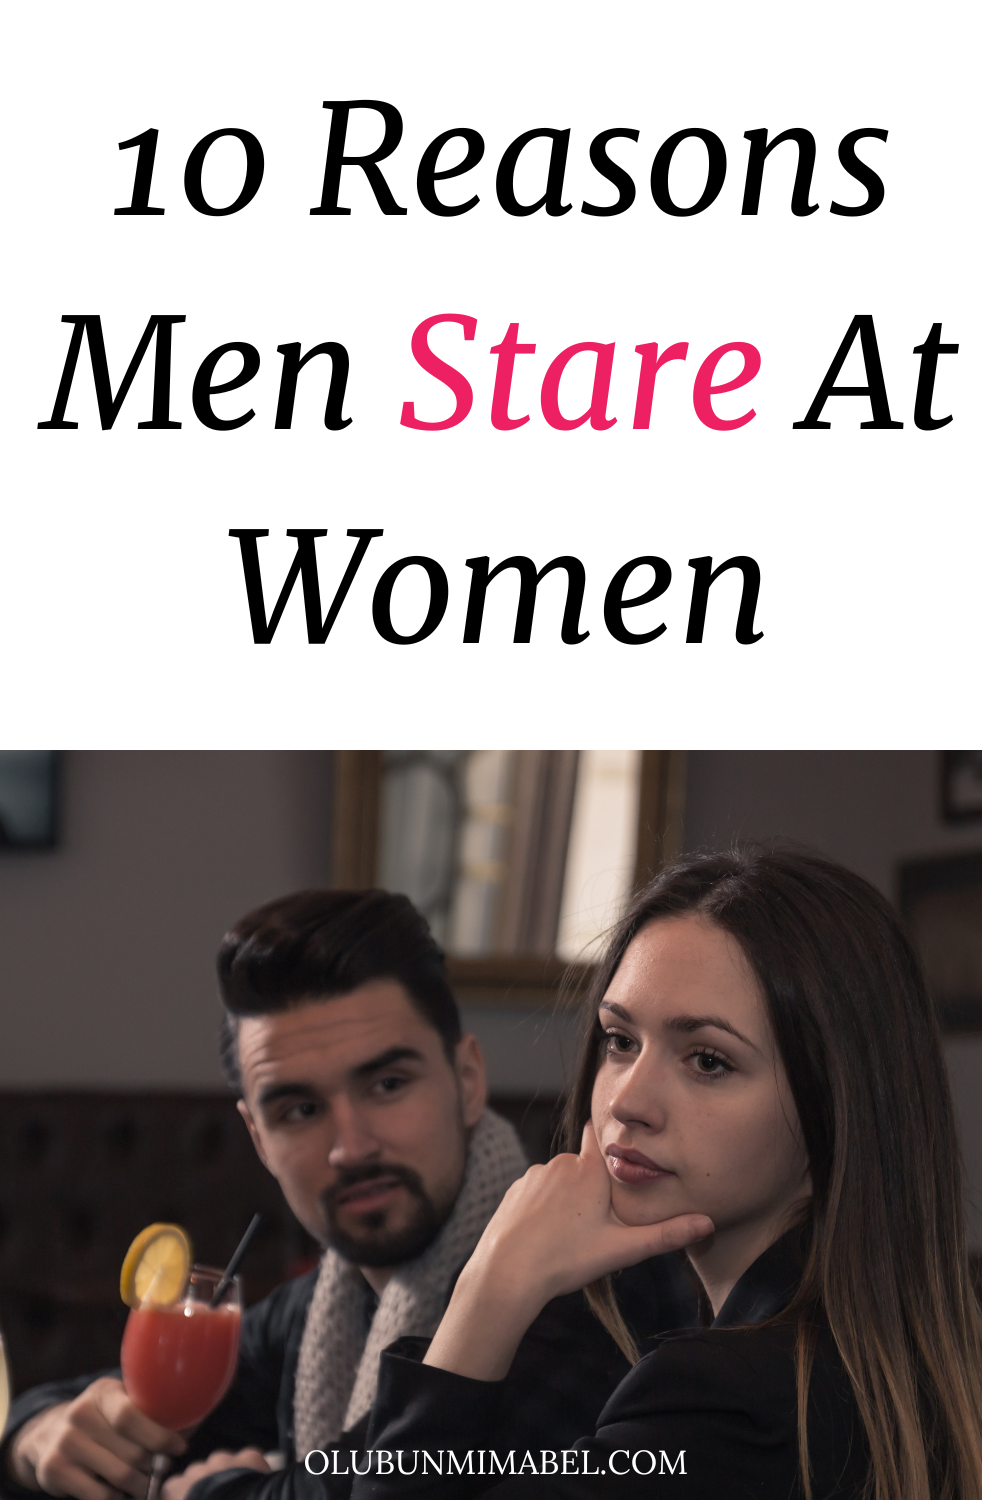 Why Do Men Stare At Women? 